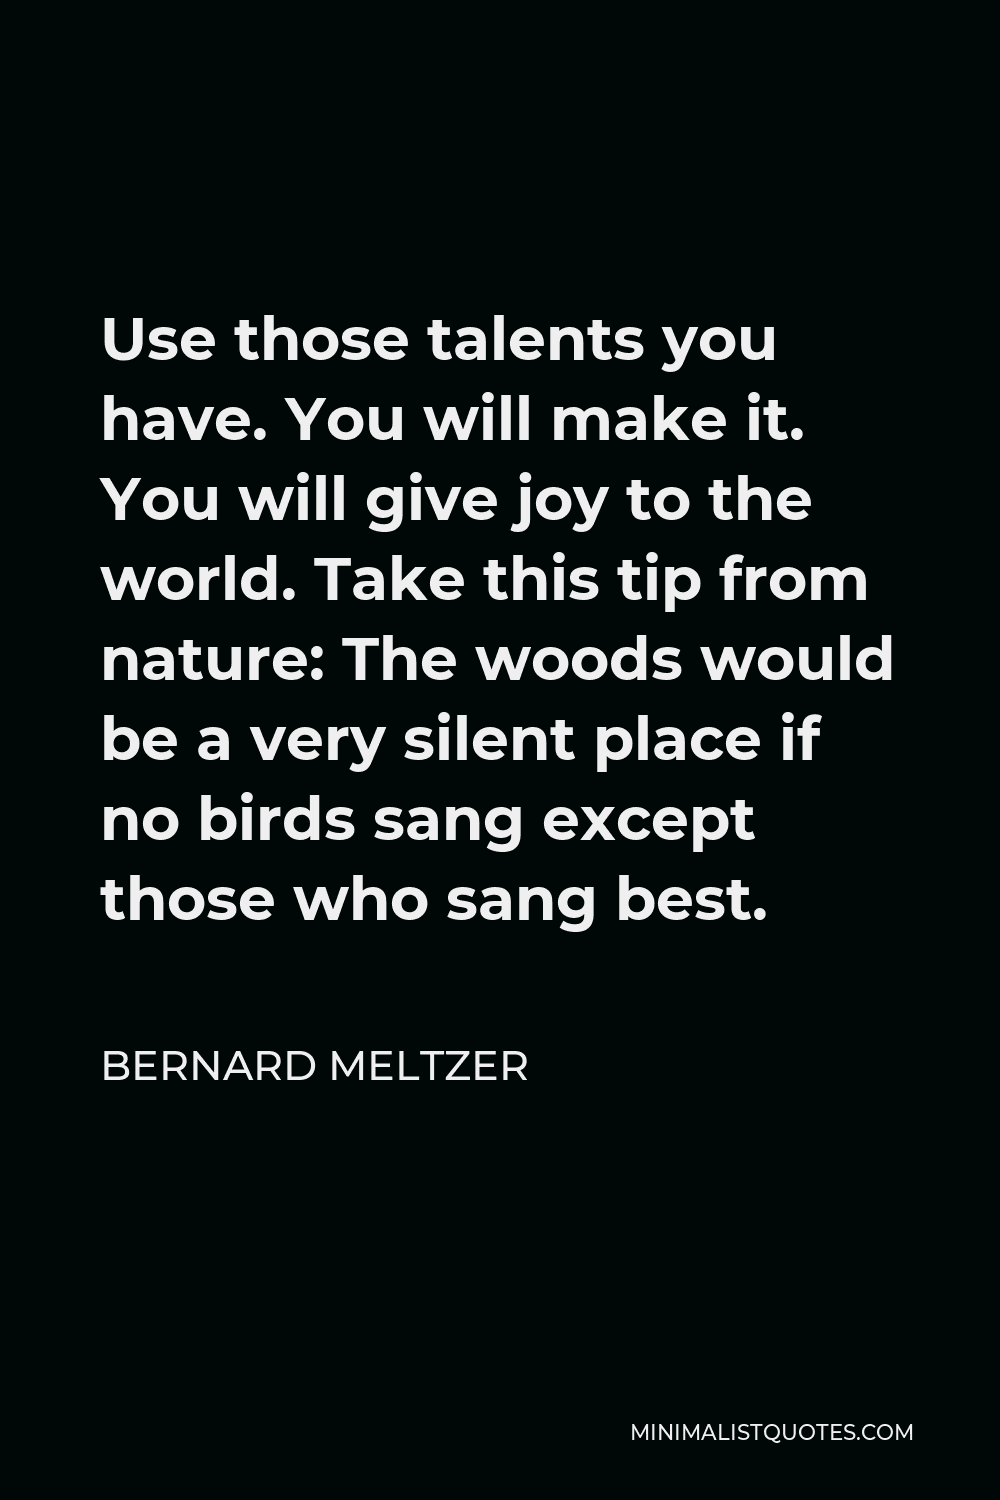 Bernard Meltzer Quote - Use those talents you have. You will make it. You will give joy to the world. Take this tip from nature: The woods would be a very silent place if no birds sang except those who sang best.